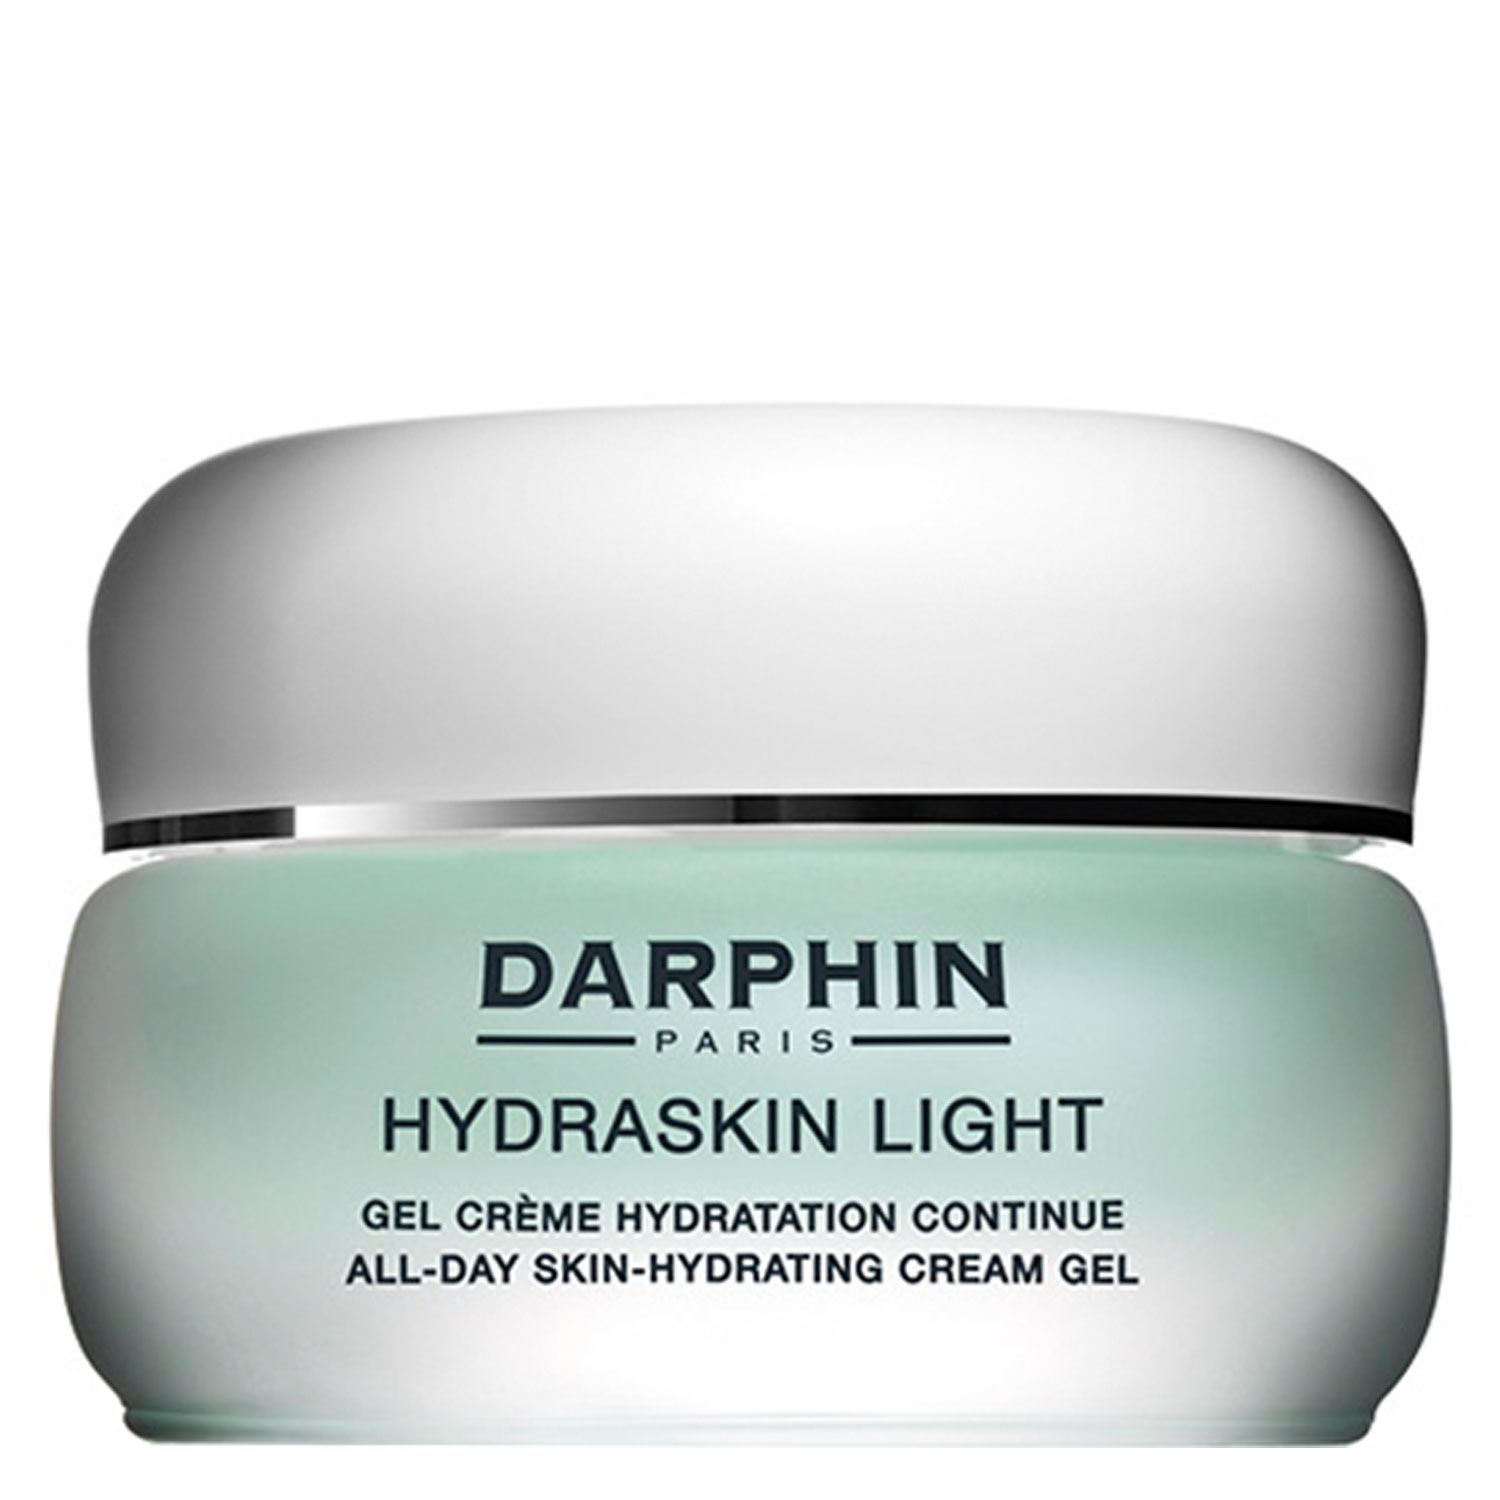 Product image from HYDRASKIN - Light All-Day Skin-Hydrating Cream Gel